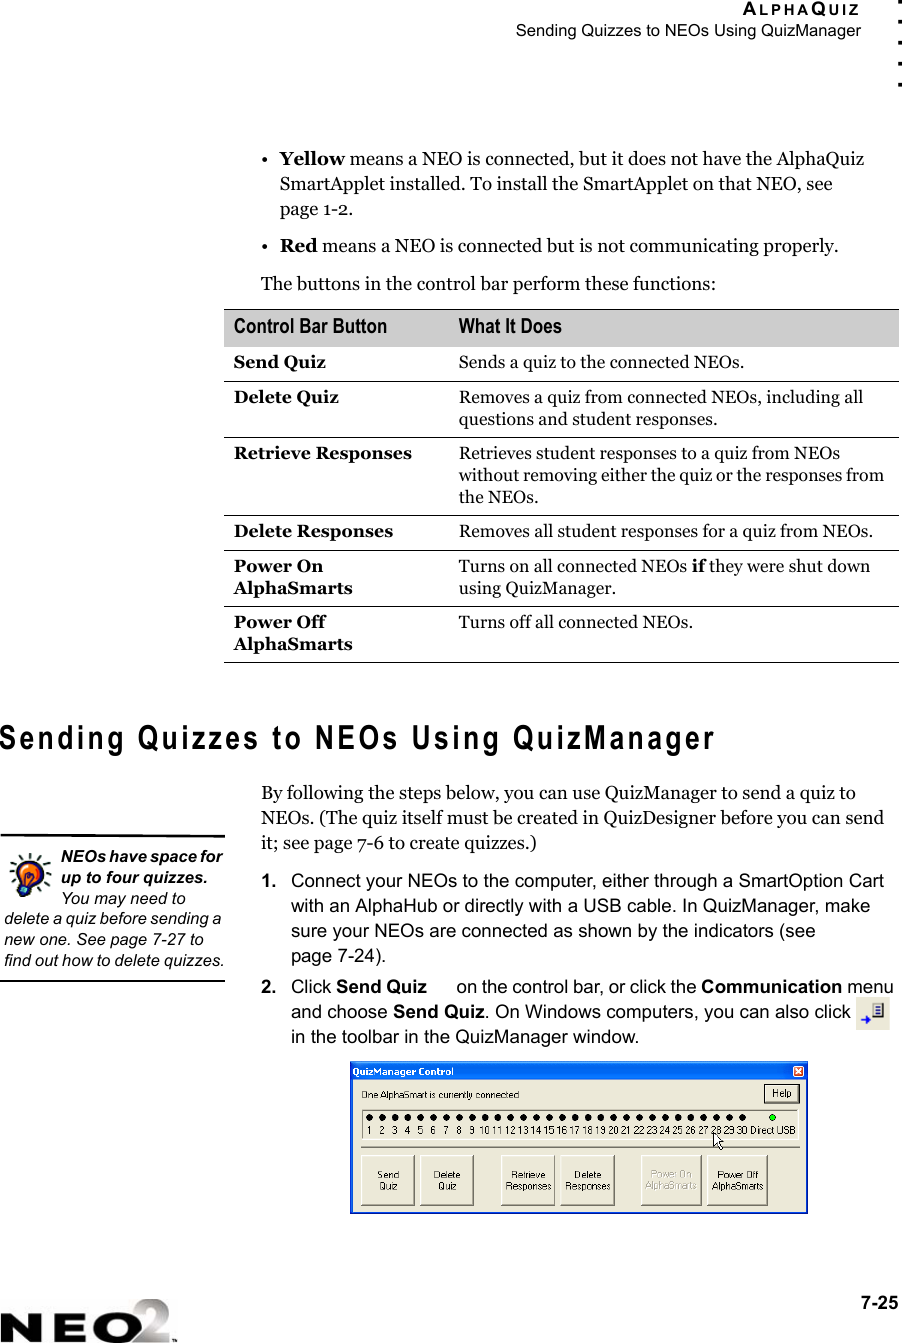 ALPHAQUIZSending Quizzes to NEOs Using QuizManager7-25. . . . .•Yellow means a NEO is connected, but it does not have the AlphaQuiz SmartApplet installed. To install the SmartApplet on that NEO, seepage 1-2.•Red means a NEO is connected but is not communicating properly.The buttons in the control bar perform these functions:Sending Quizzes to NEOs Using QuizManagerBy following the steps below, you can use QuizManager to send a quiz to NEOs. (The quiz itself must be created in QuizDesigner before you can send it; see page 7-6 to create quizzes.)1. Connect your NEOs to the computer, either through a SmartOption Cart with an AlphaHub or directly with a USB cable. In QuizManager, make sure your NEOs are connected as shown by the indicators (seepage 7-24).2. Click Send Quiz   on the control bar, or click the Communication menu and choose Send Quiz. On Windows computers, you can also click   in the toolbar in the QuizManager window.Control Bar Button What It DoesSend Quiz Sends a quiz to the connected NEOs.Delete Quiz Removes a quiz from connected NEOs, including all questions and student responses.Retrieve Responses Retrieves student responses to a quiz from NEOs without removing either the quiz or the responses from the NEOs.Delete Responses Removes all student responses for a quiz from NEOs.Power On AlphaSmartsTurns on all connected NEOs if they were shut down using QuizManager.Power Off AlphaSmartsTurns off all connected NEOs.NEOs have space for up to four quizzes. You may need to delete a quiz before sending a new one. See page 7-27 to find out how to delete quizzes.